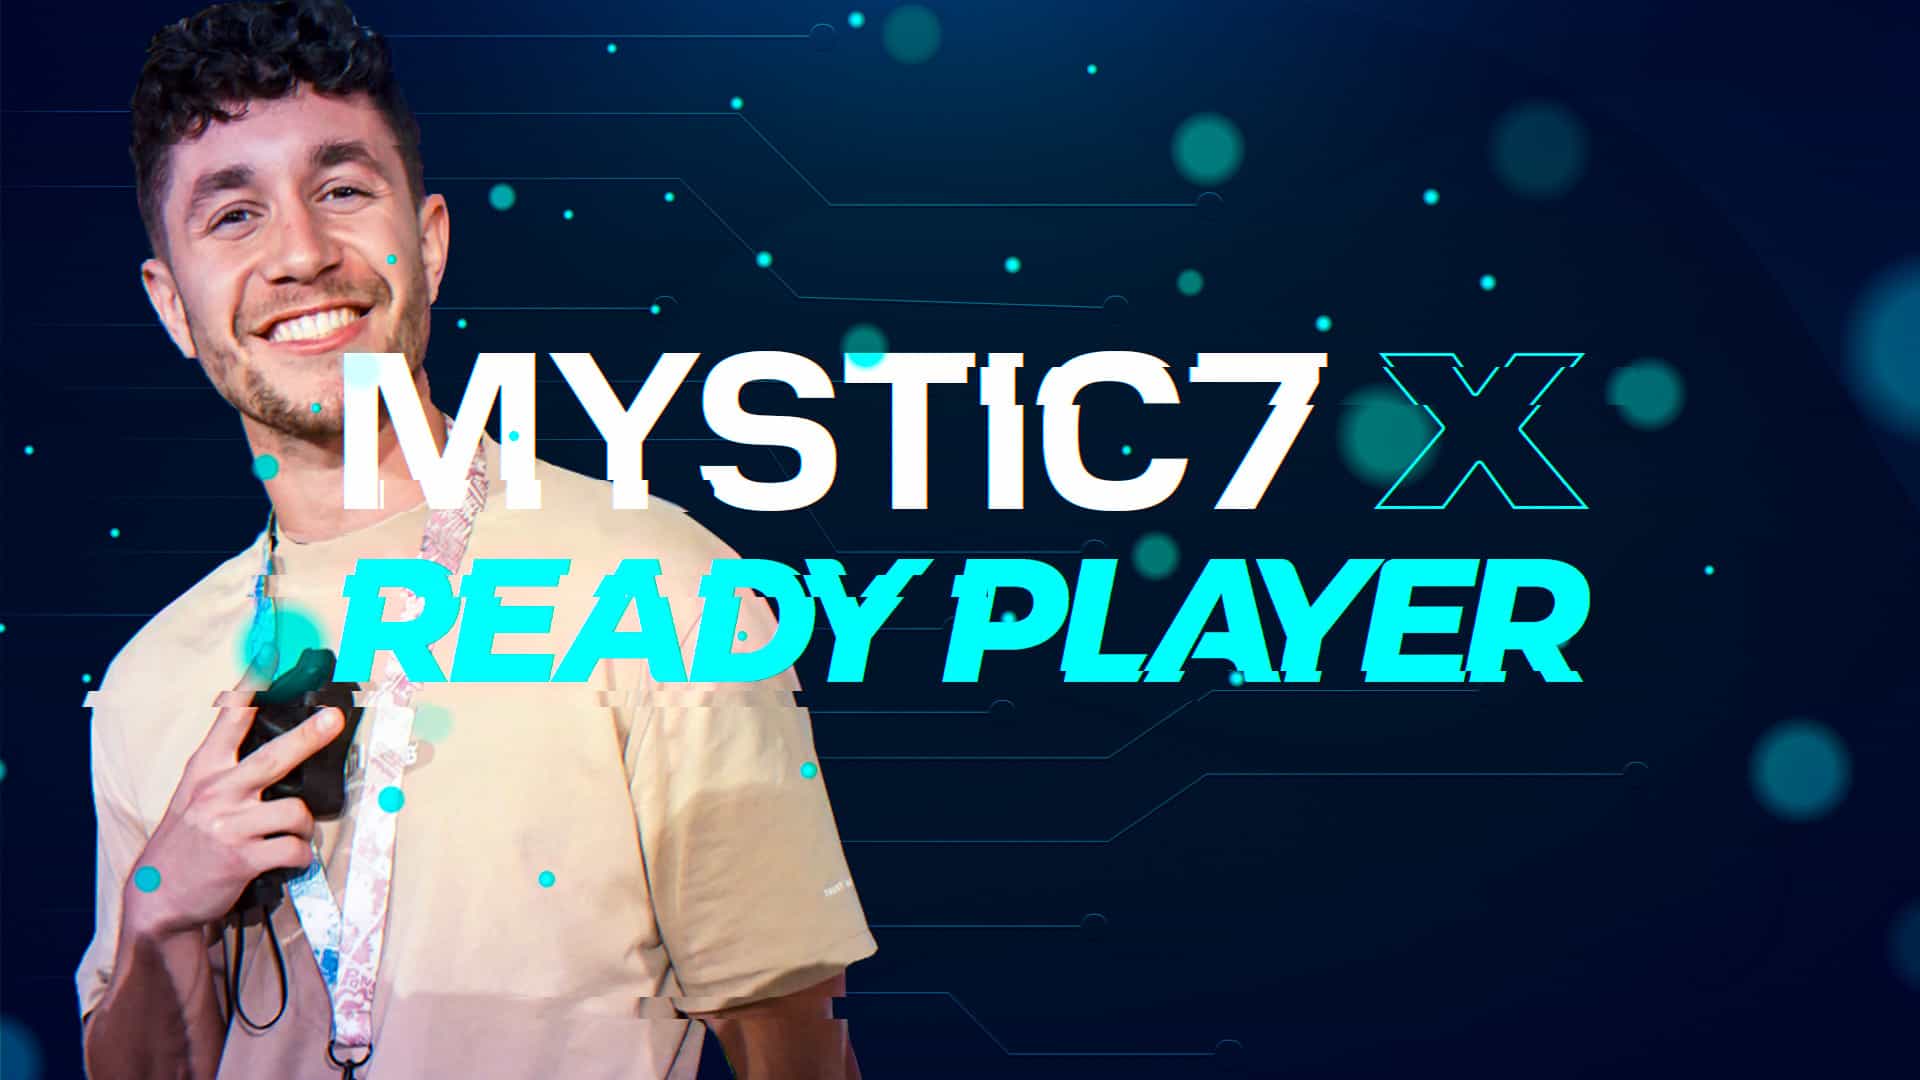 Web3-platform-ready-player-dao-partners-with-gaming-content-creator-mystic7